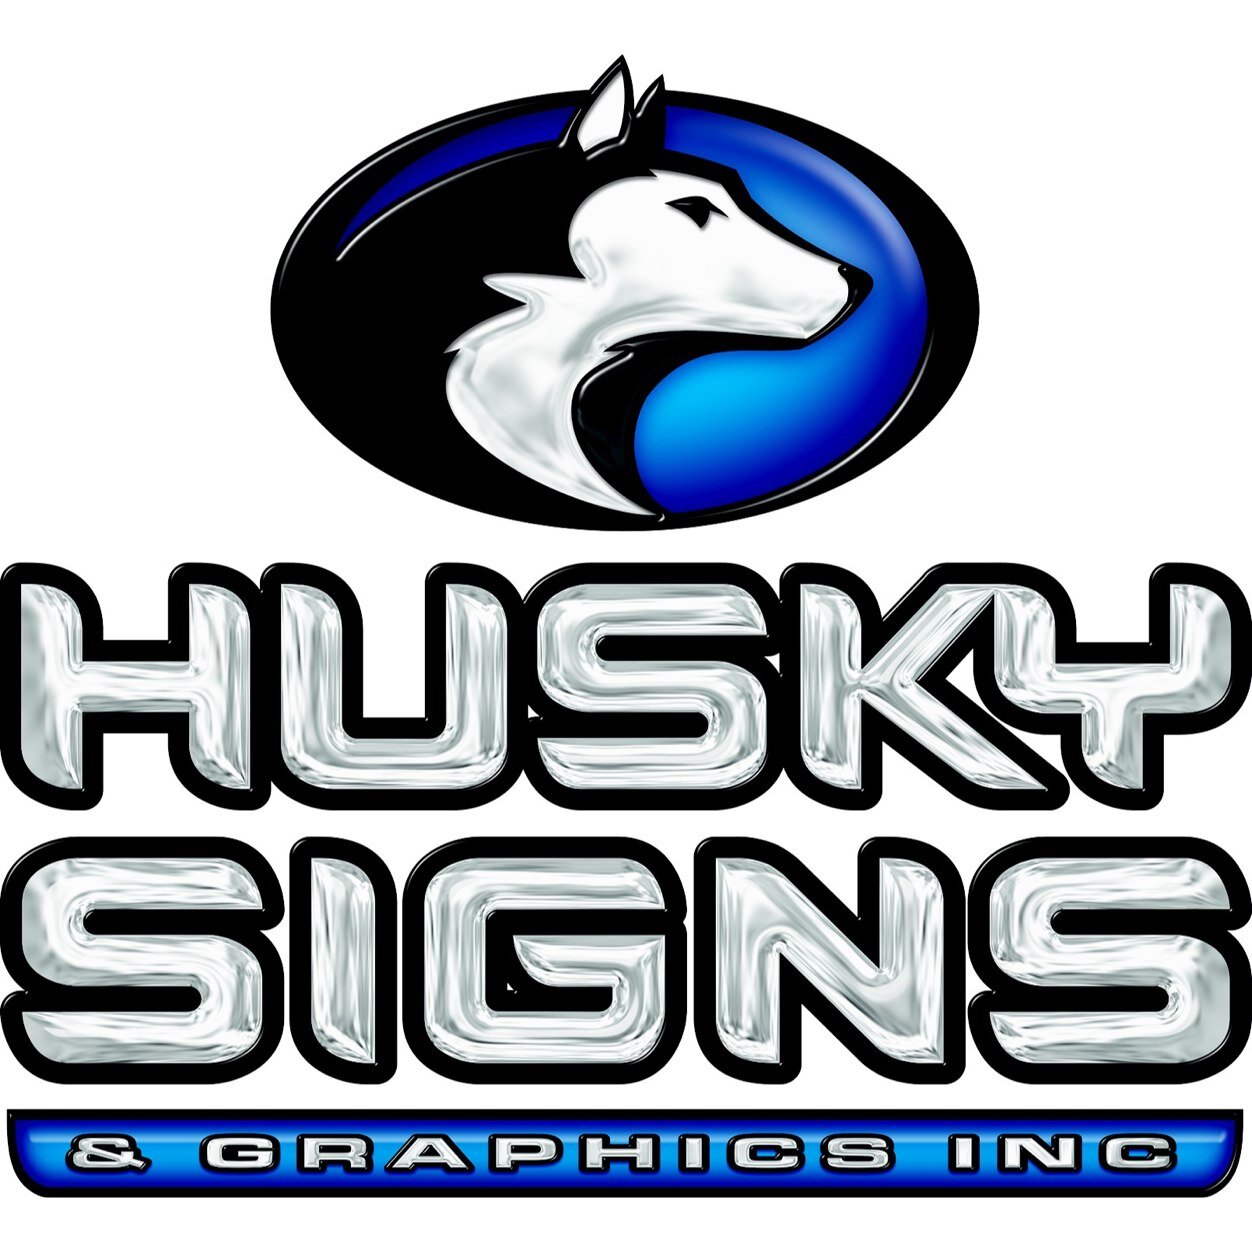 A full service sign shop based in Boulder, Colorado specializing in custom vehicle wrap design a d installation. Focus on design.